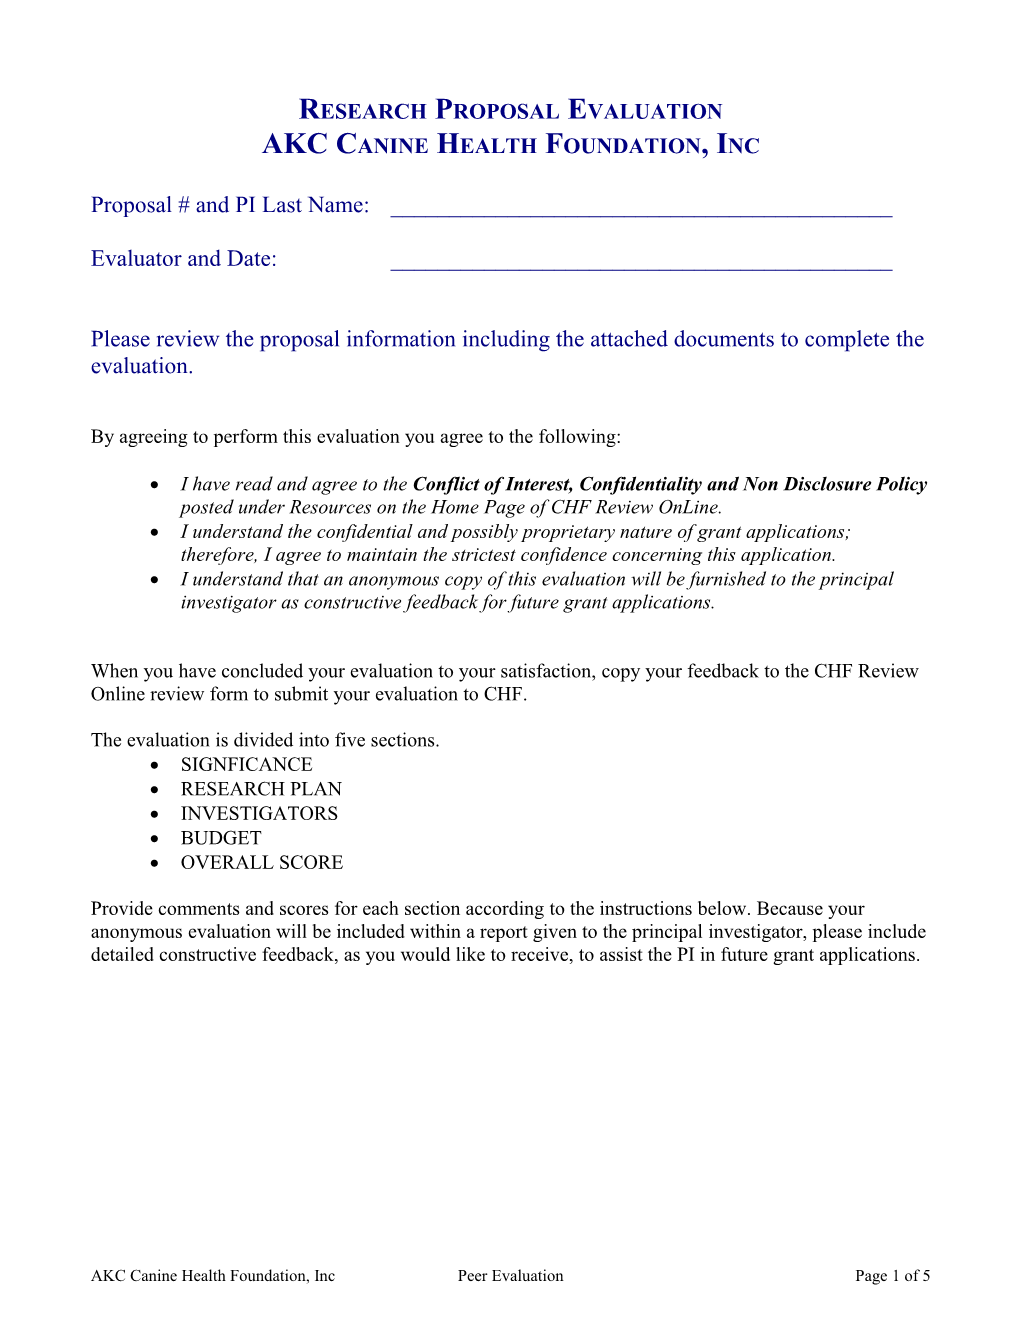 Research Grant Application Evaluation Form